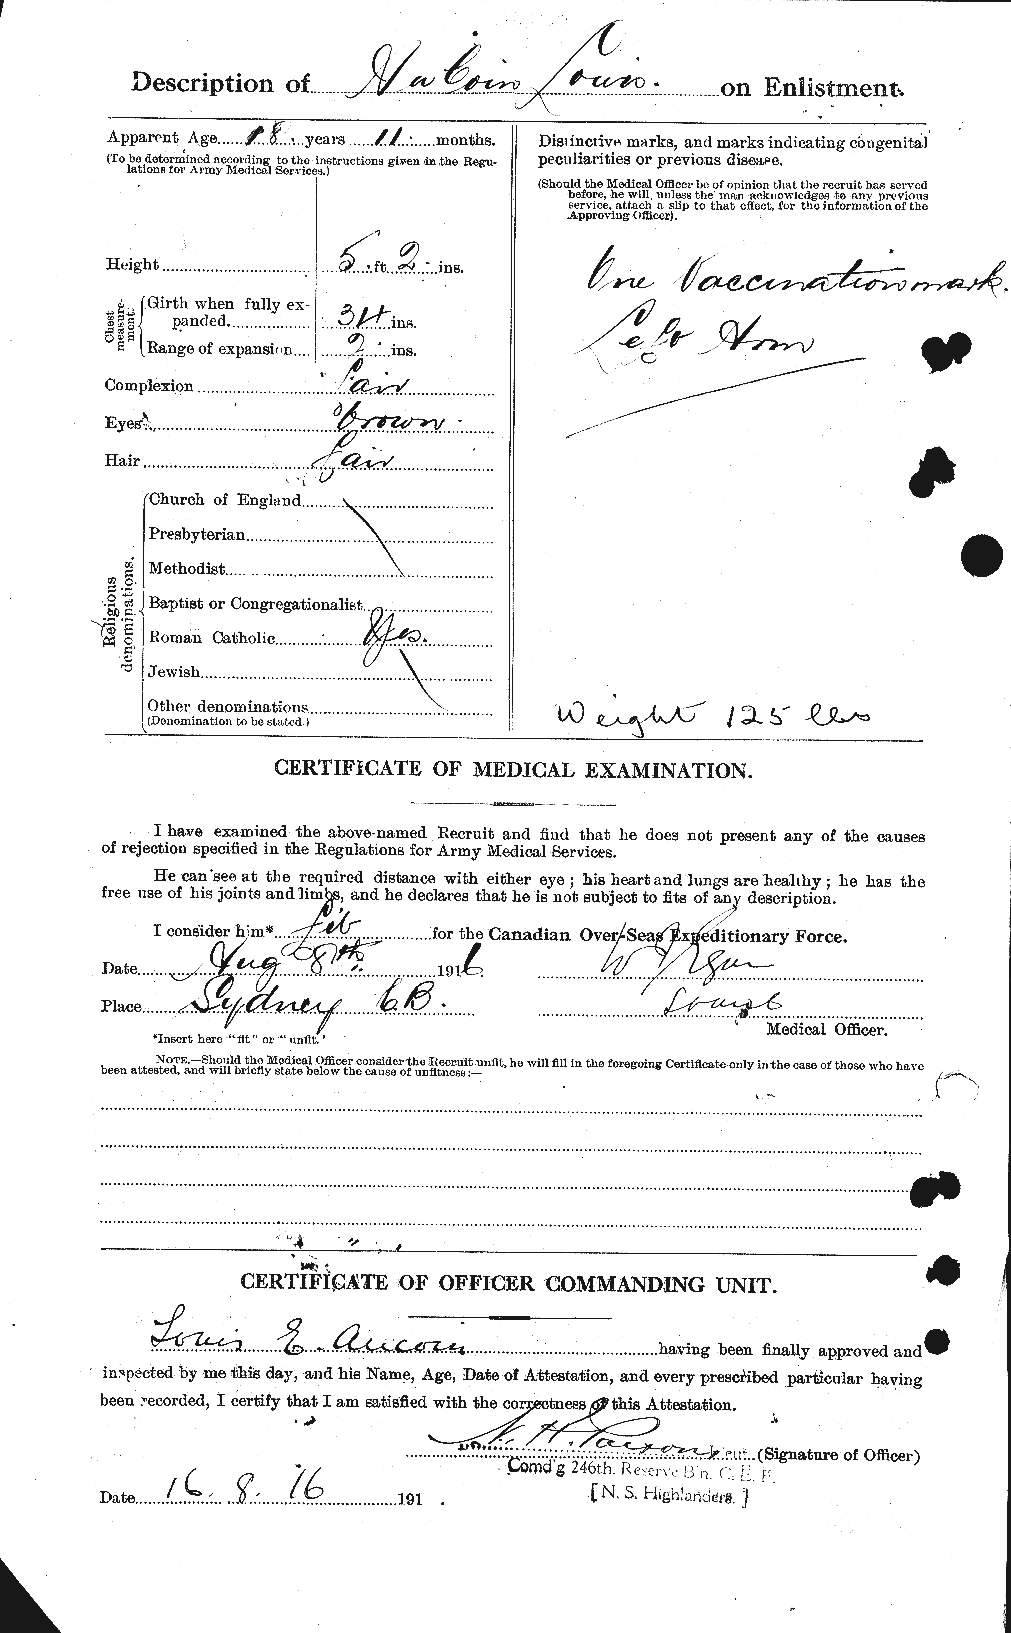 Personnel Records of the First World War - CEF 224543b